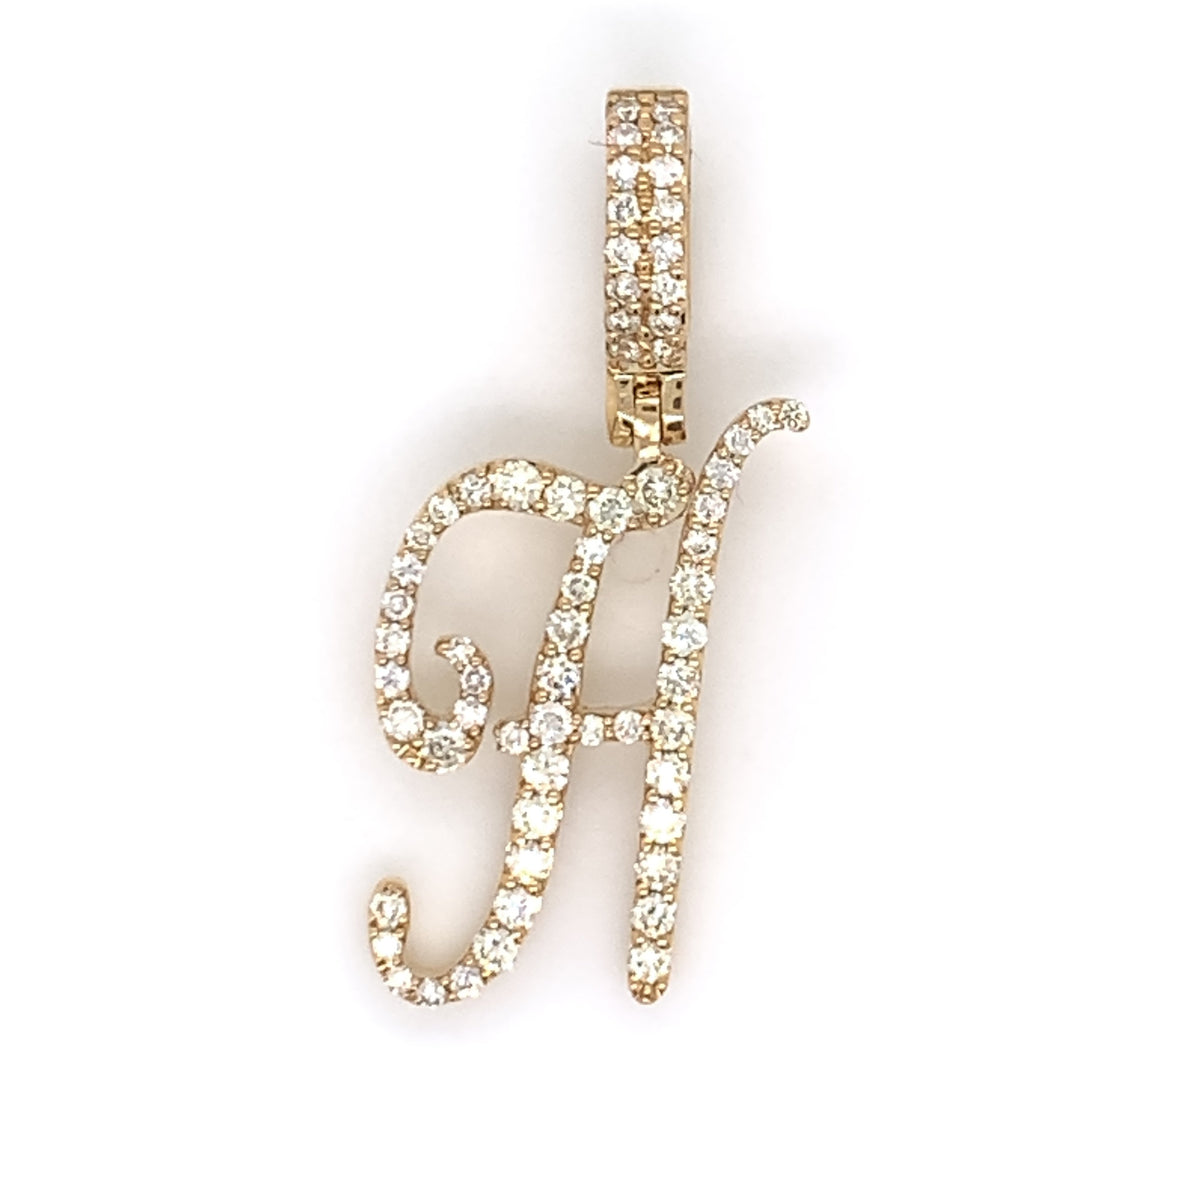 1.00 CT. Diamond Initial "H" Pendant in Gold With Chain - White Carat Diamonds 